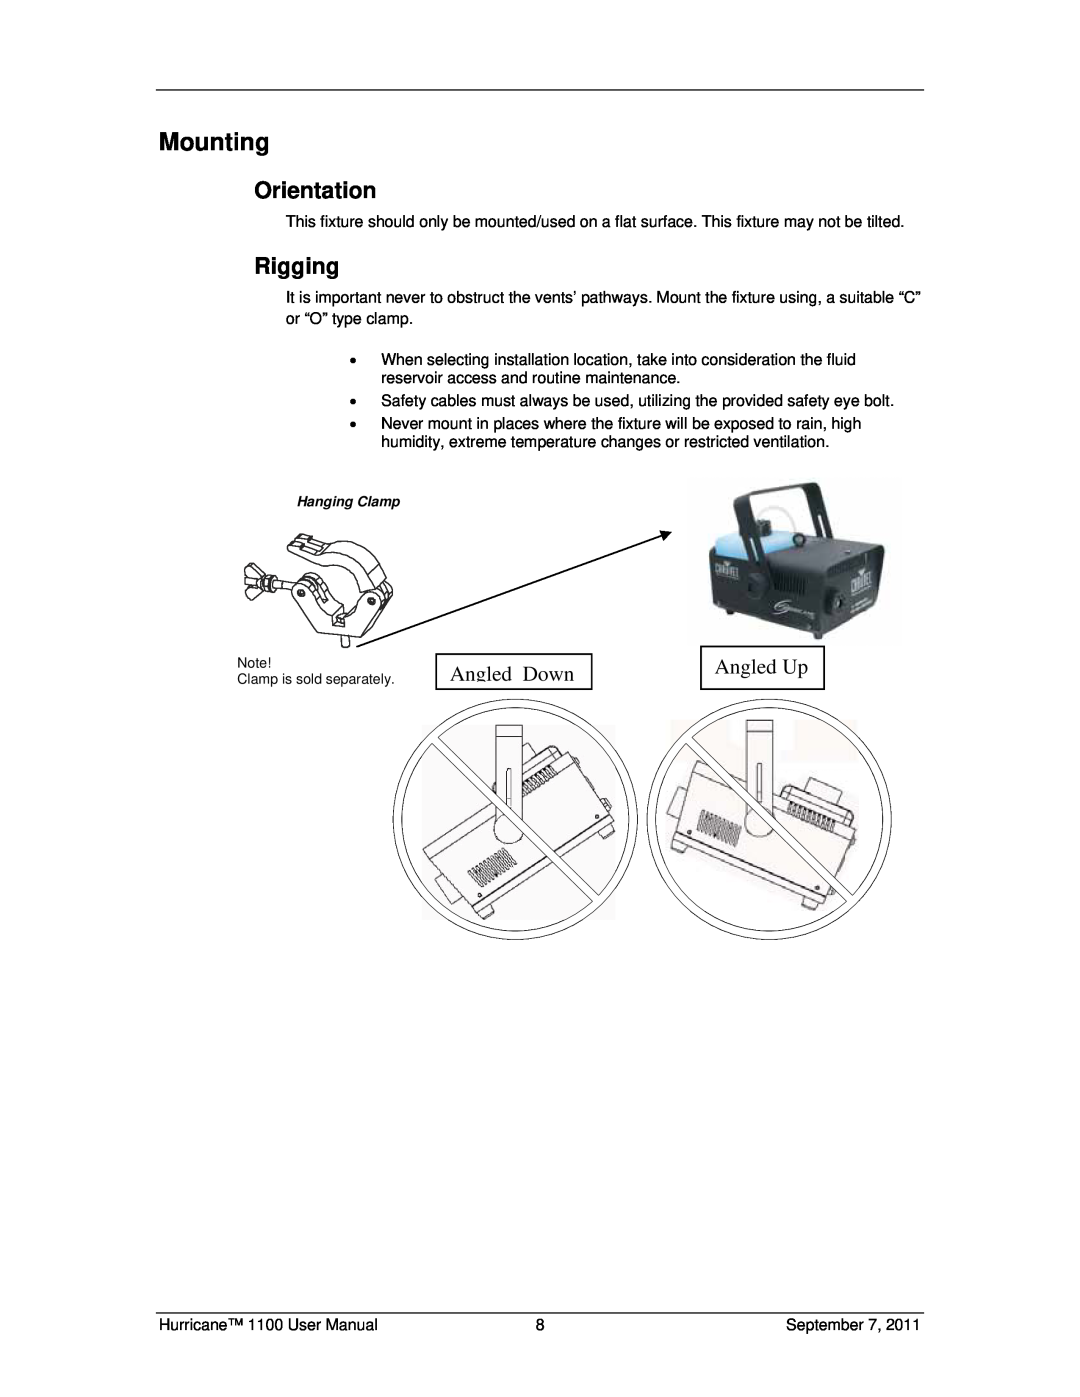 Chauvet 1100 user manual Mounting, Orientation, Rigging, Angled Down, Angled Up 